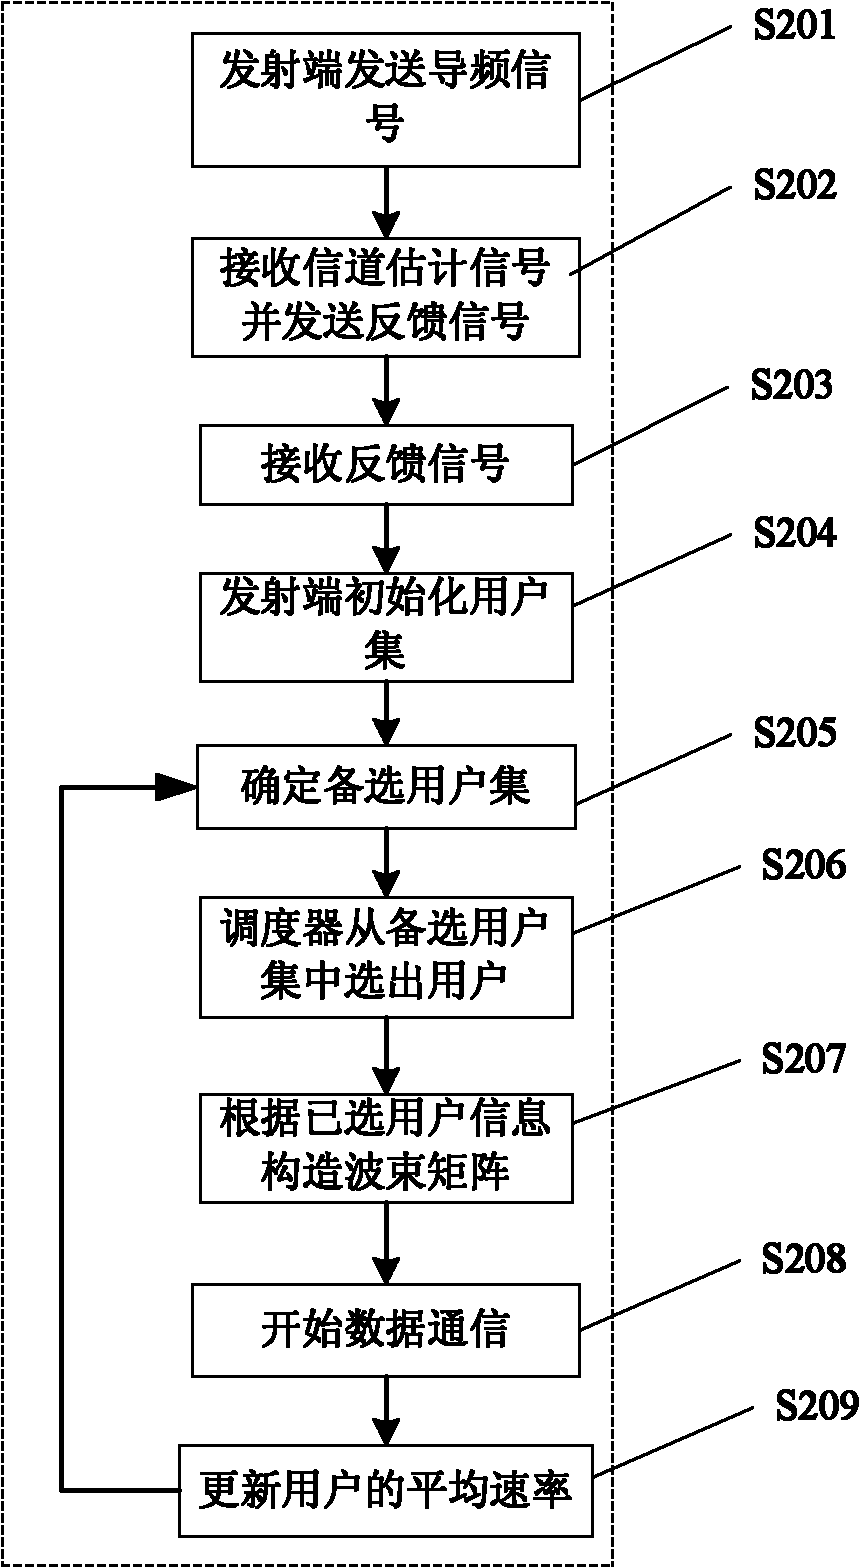 Multiuser MIMO (multiple-input multiple-output) downlink transmitting and dispatching method